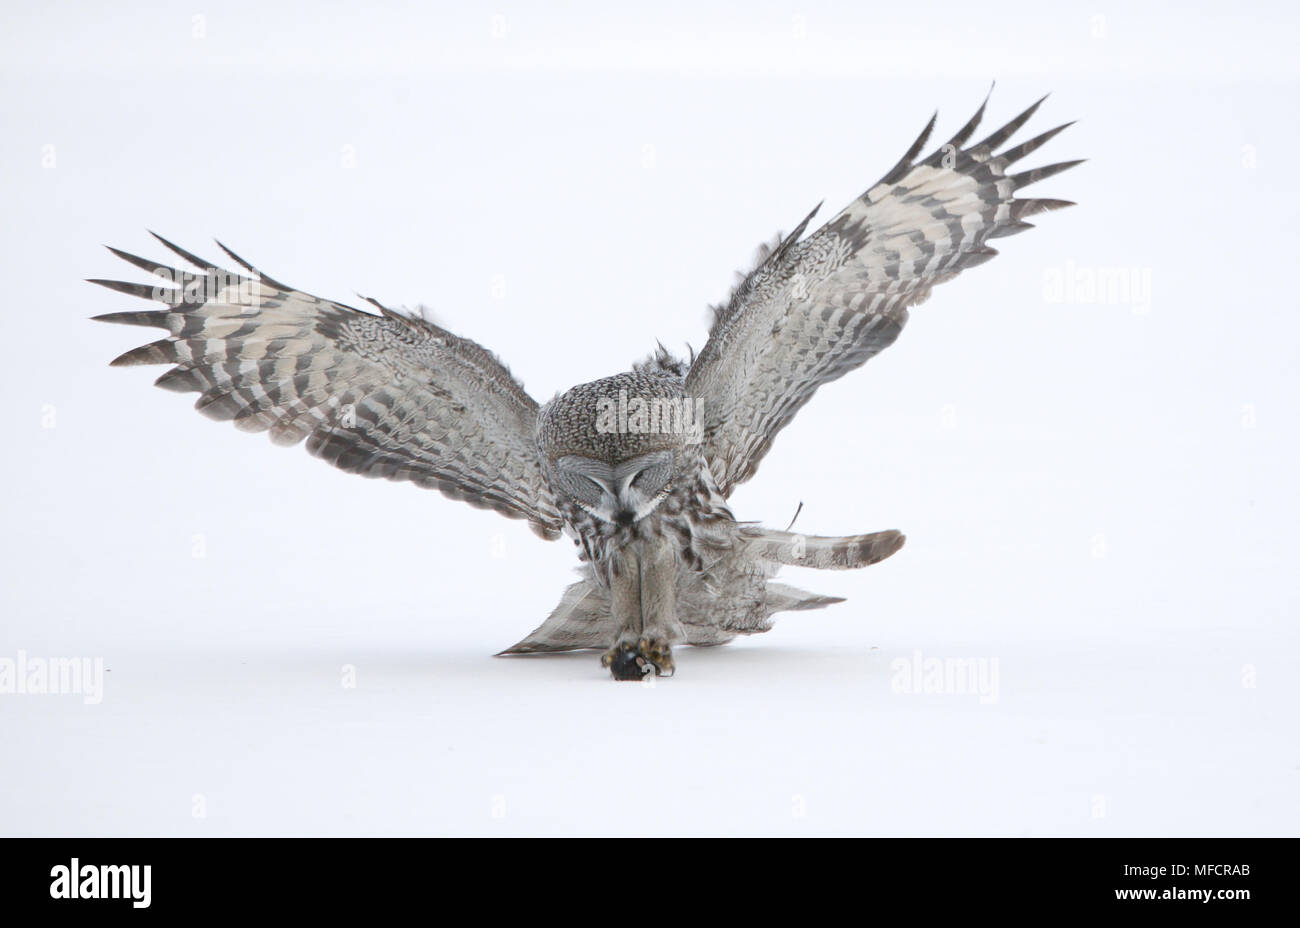 GREAT GREY OWL  Strix nebulosa swooping on Mouse prey Finland Stock Photo